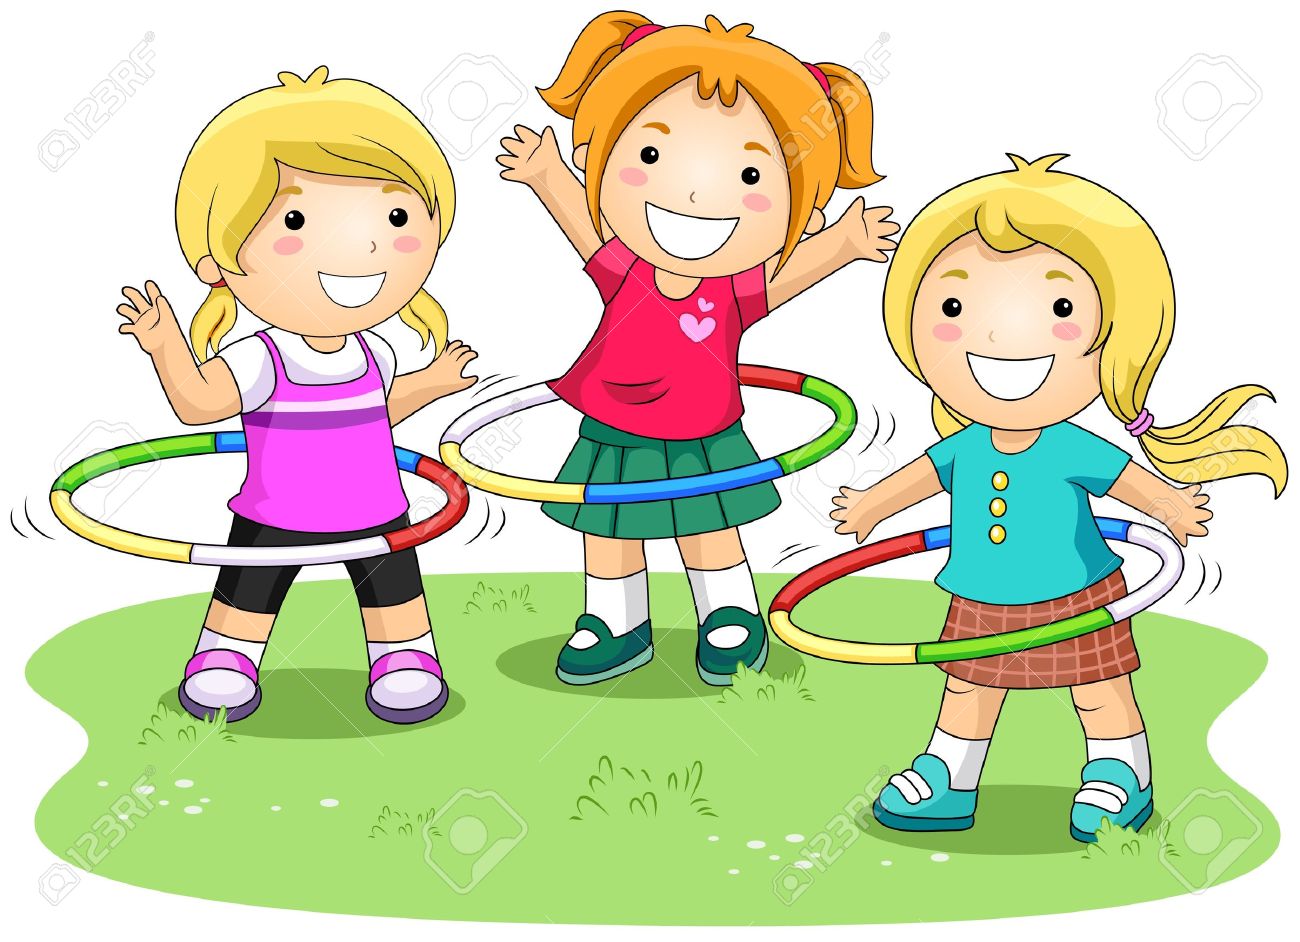 Children playing toys clip ar - Clip Art Kids Playing